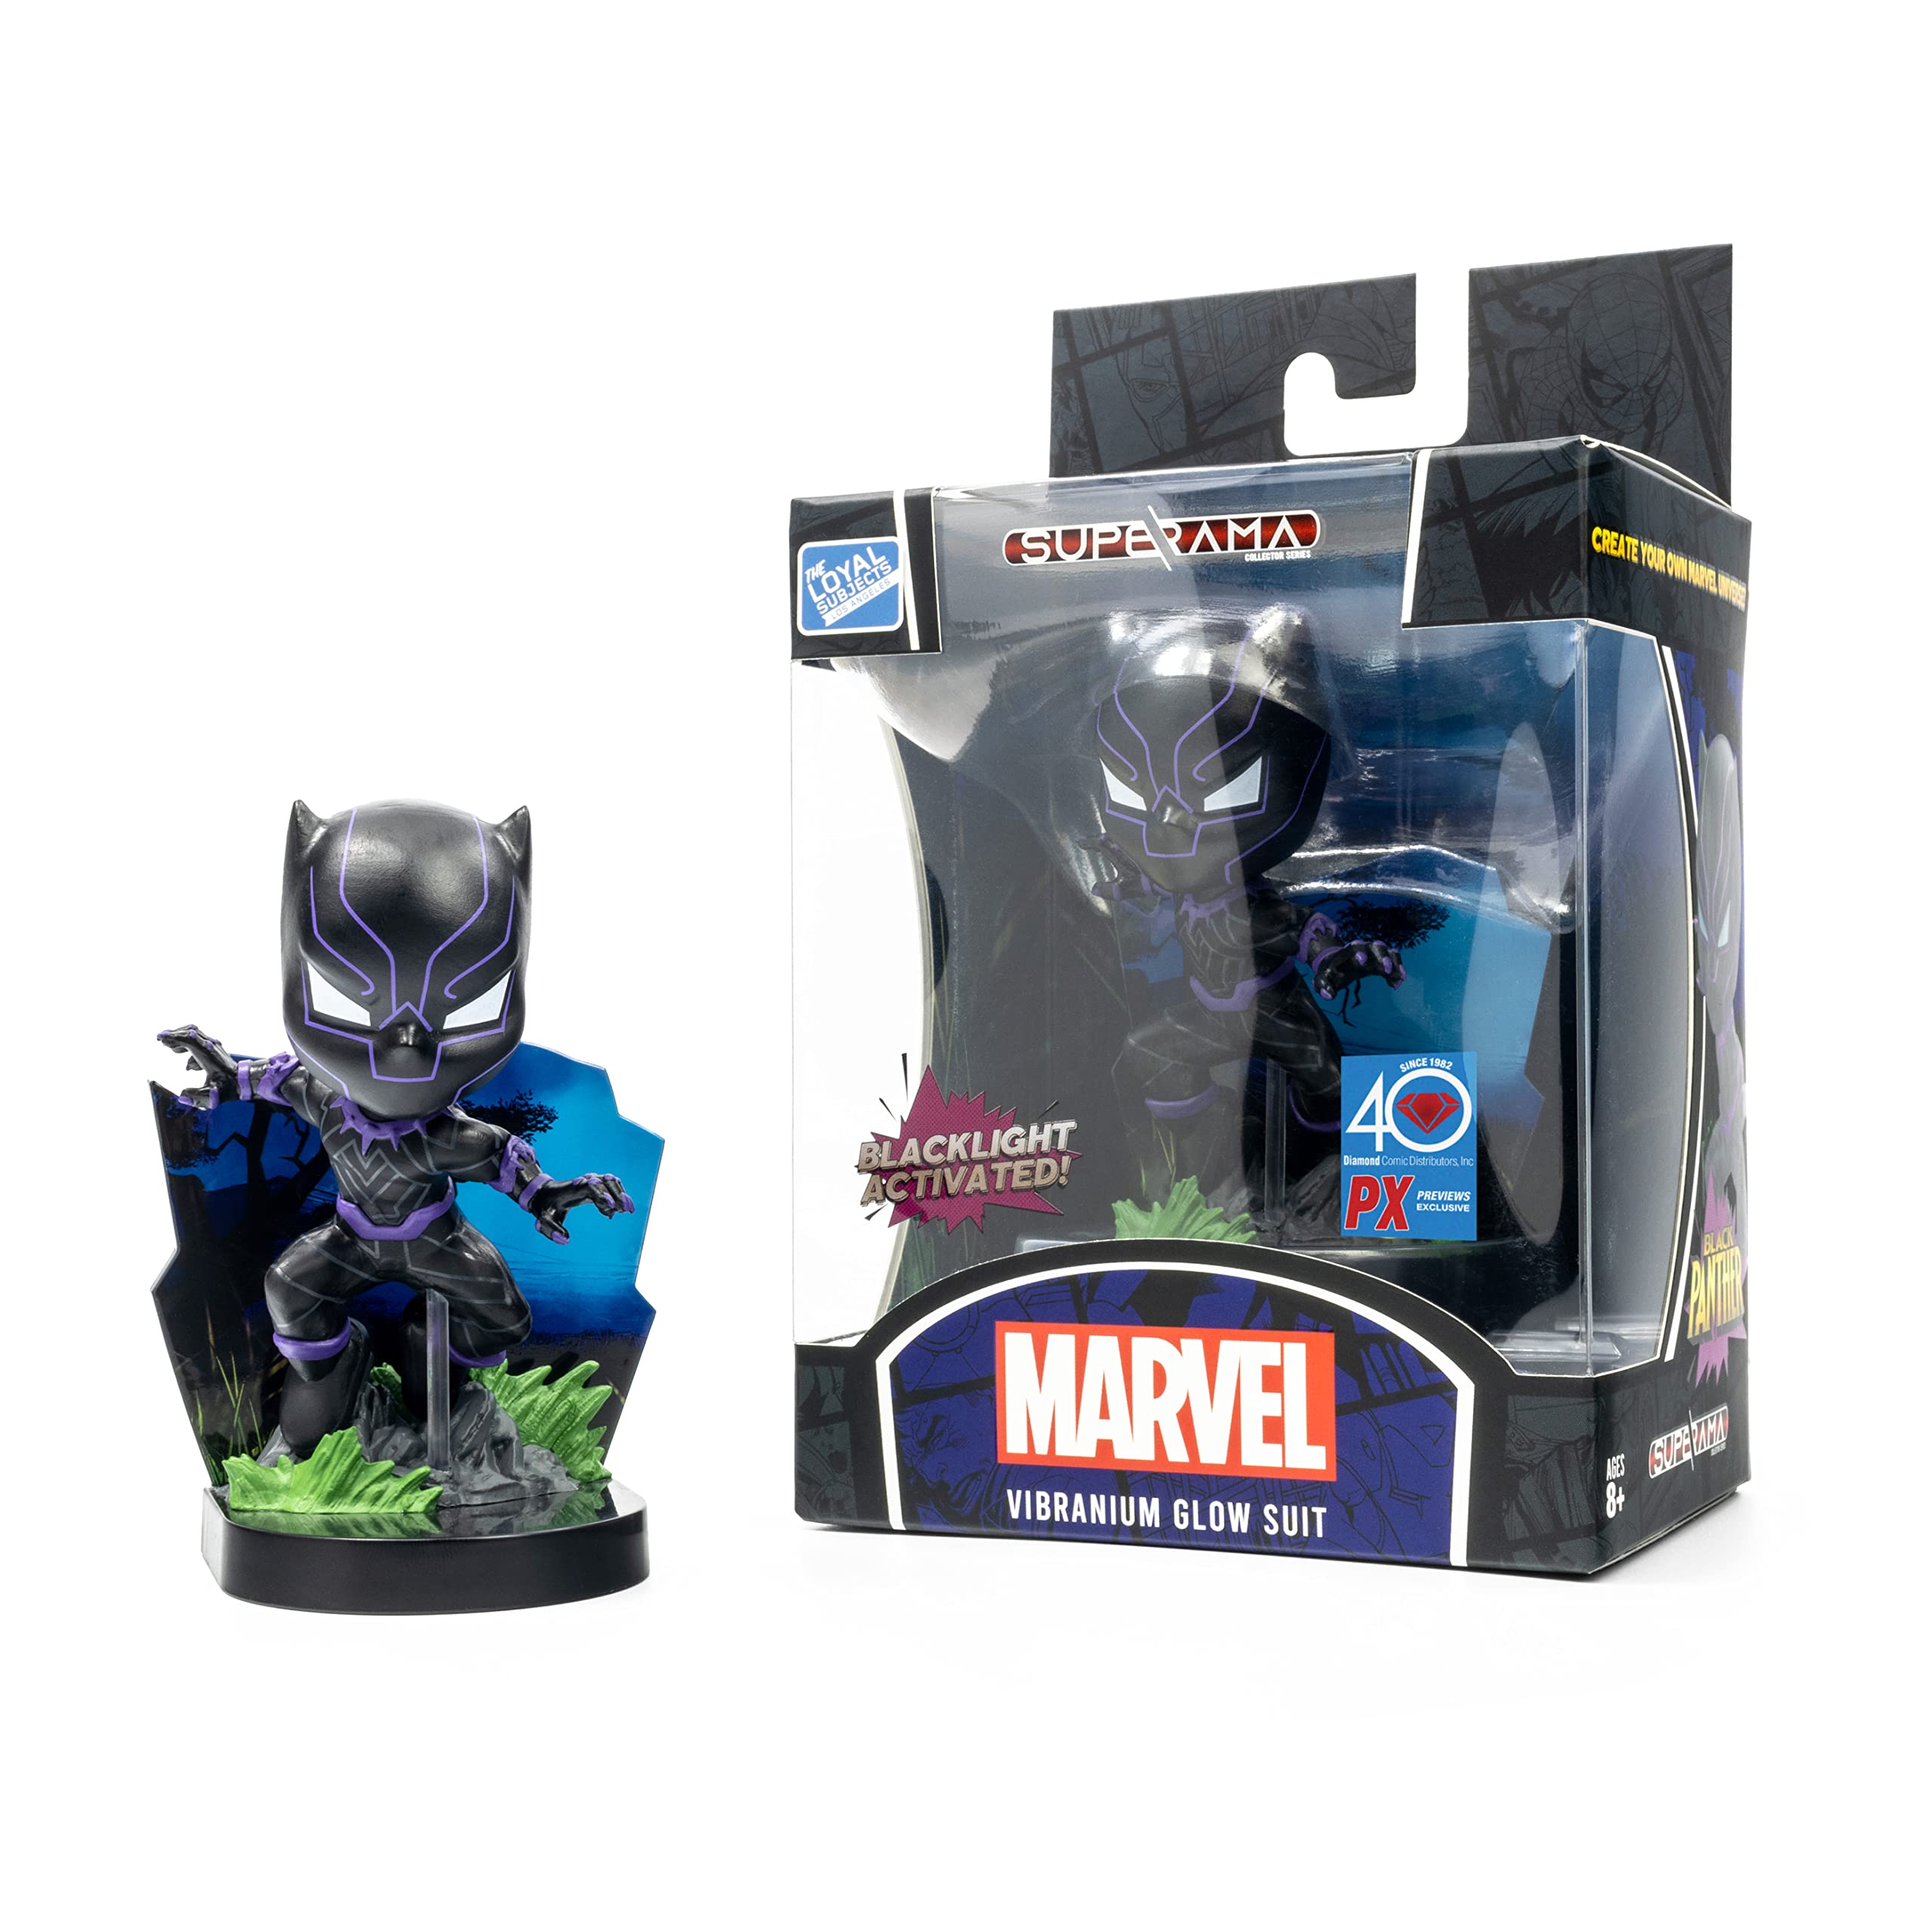 SUPERAMA Marvel Black Panther Kinetic Energy PX Collectable Figure w/ Vibranium Glow Suit (Blacklight Activated) $8.70 + Free Shipping w/ Prime or on $35+